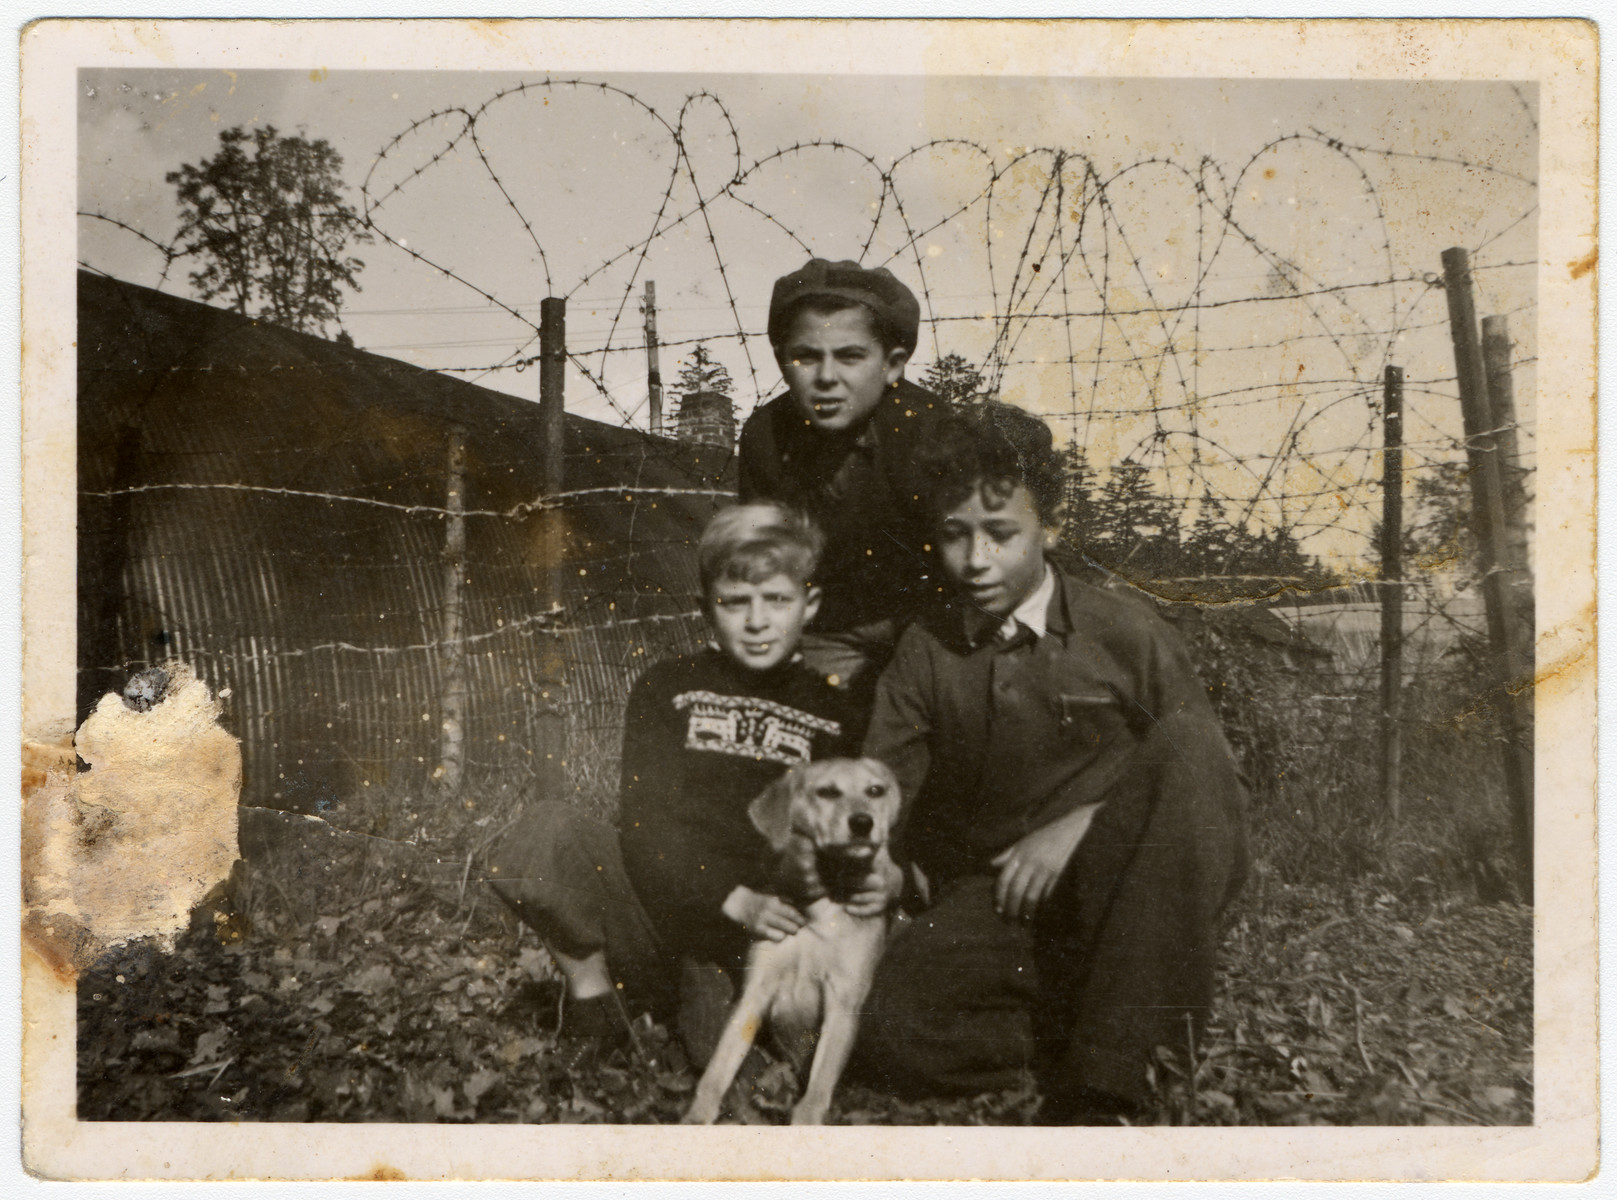 Three children who were on the Exodus pose with a dog in front of a barbed wire fence after having been sent back to Germany by the British.

Uri Urmacher is pictured in the top center.